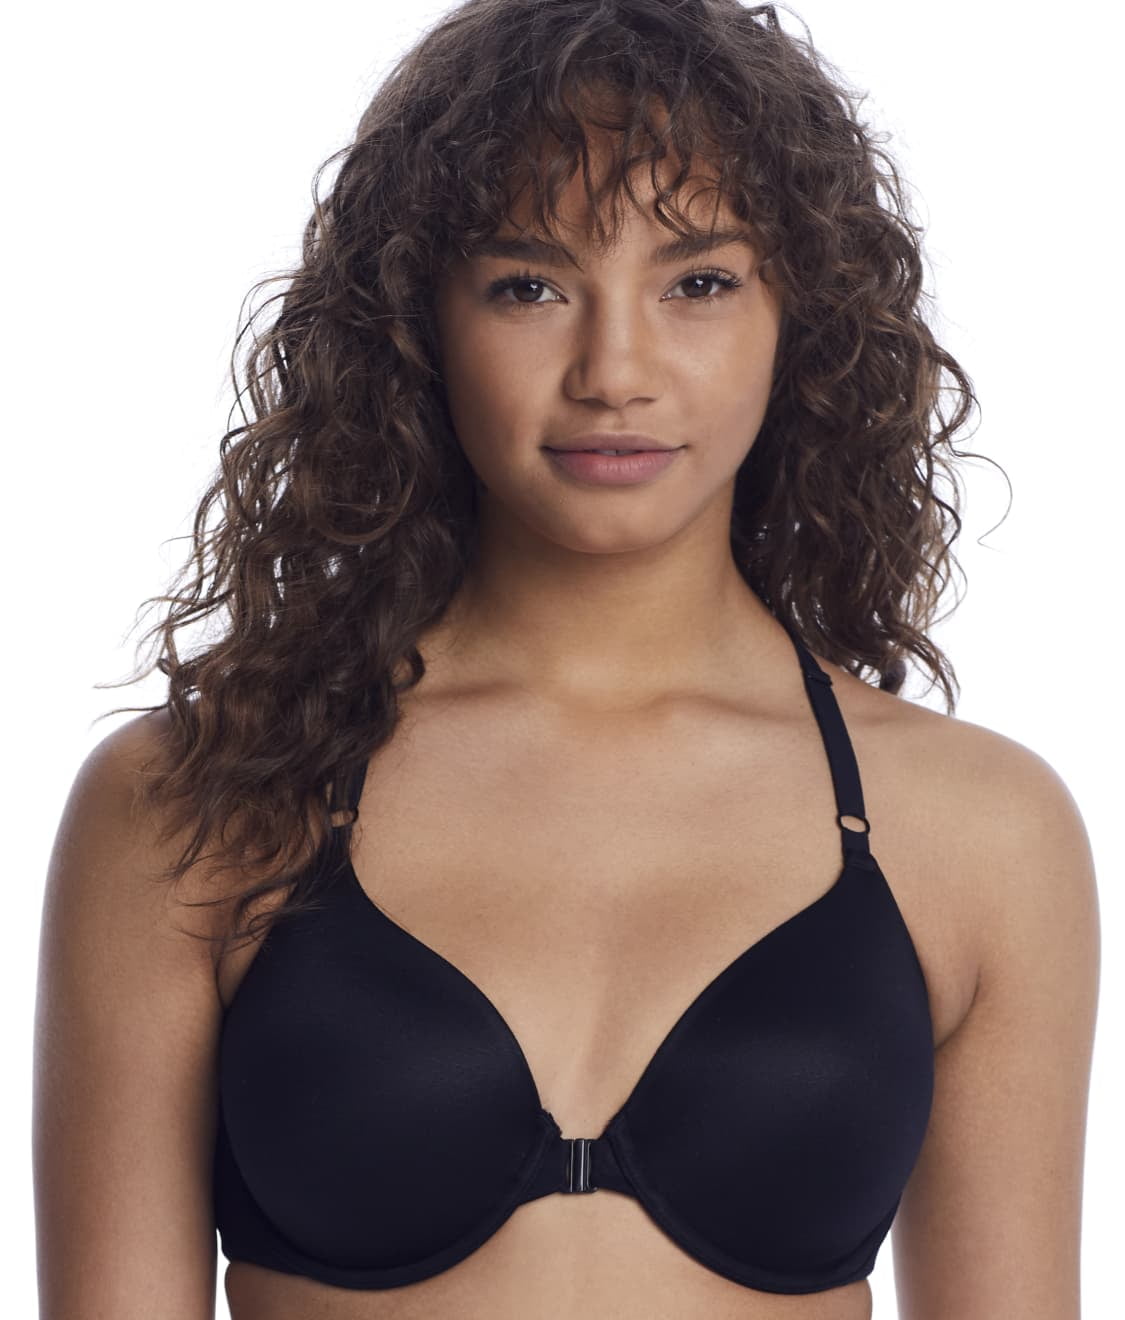 REVEAL Midnight Black The Perfect Support Underwire Bra, US 36DD